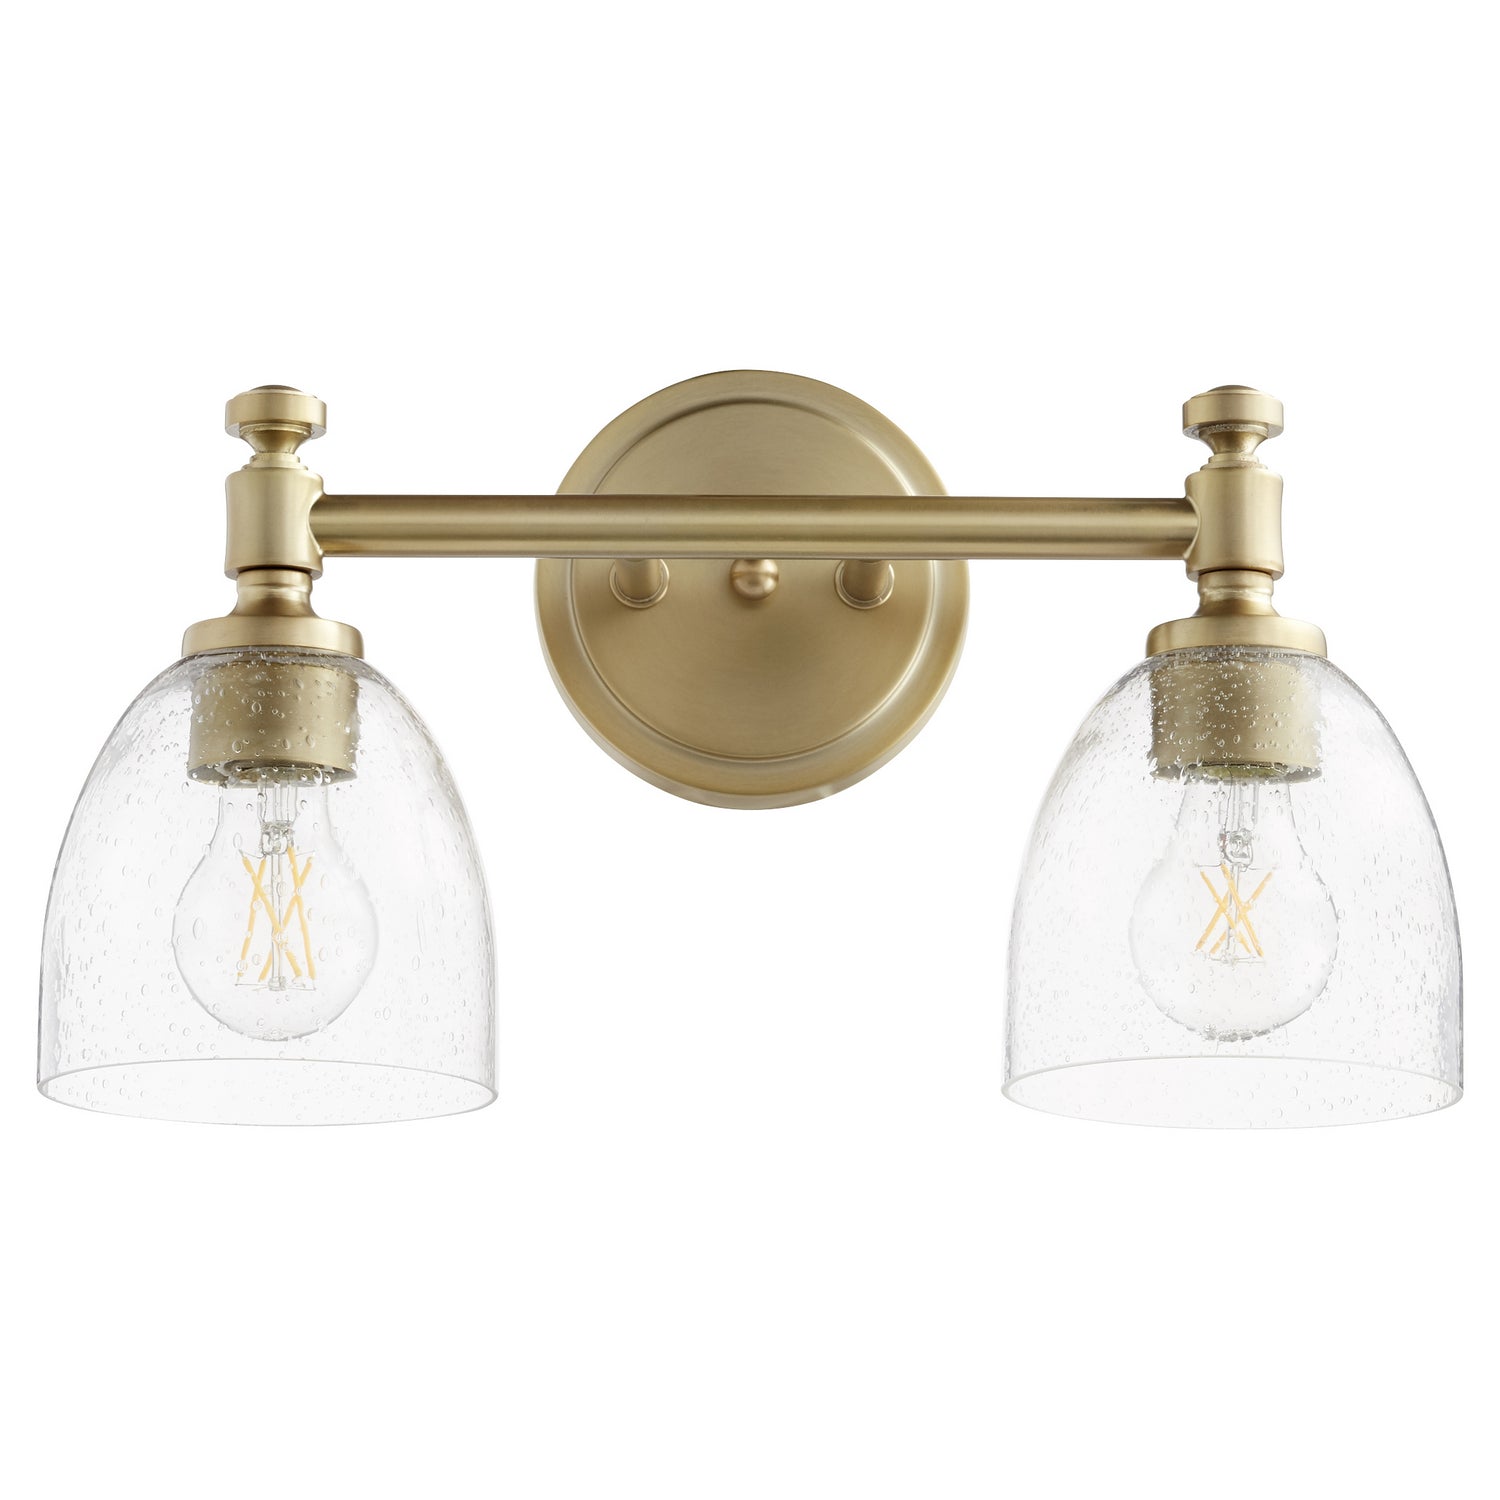 Quorum - 5122-2-280 - Two Light Vanity - Rossington - Aged Brass w/ Clear/Seeded